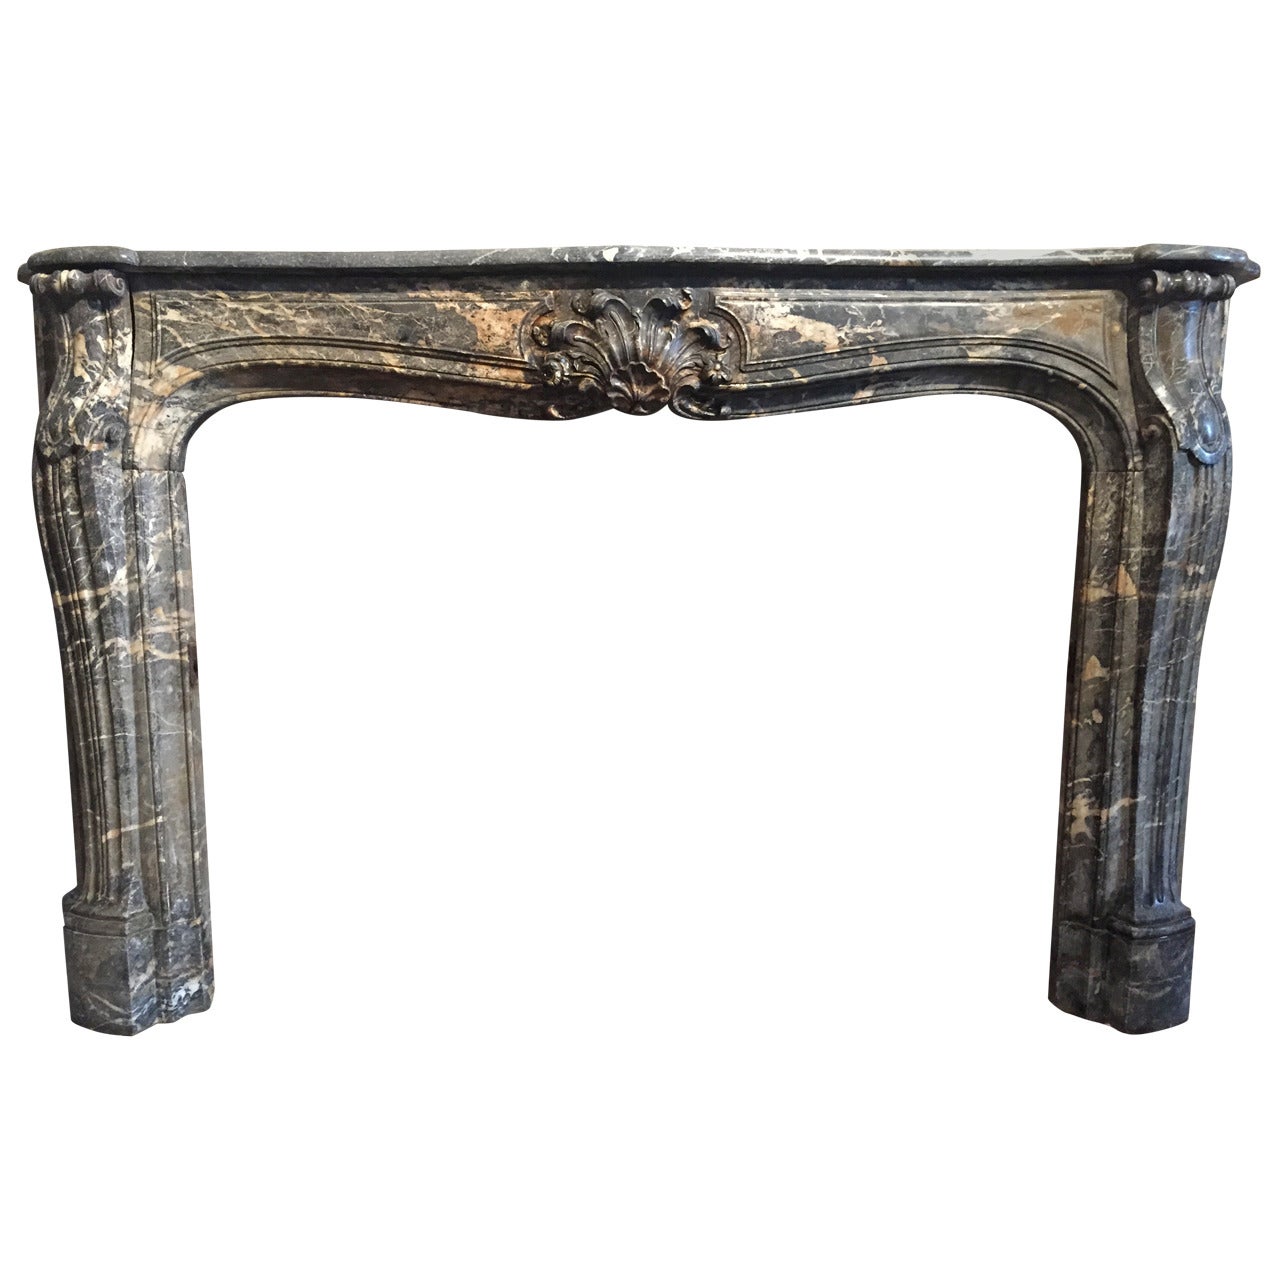 French Royalty Regence Period Fireplace Solid Marble Original 18th Century Paris For Sale